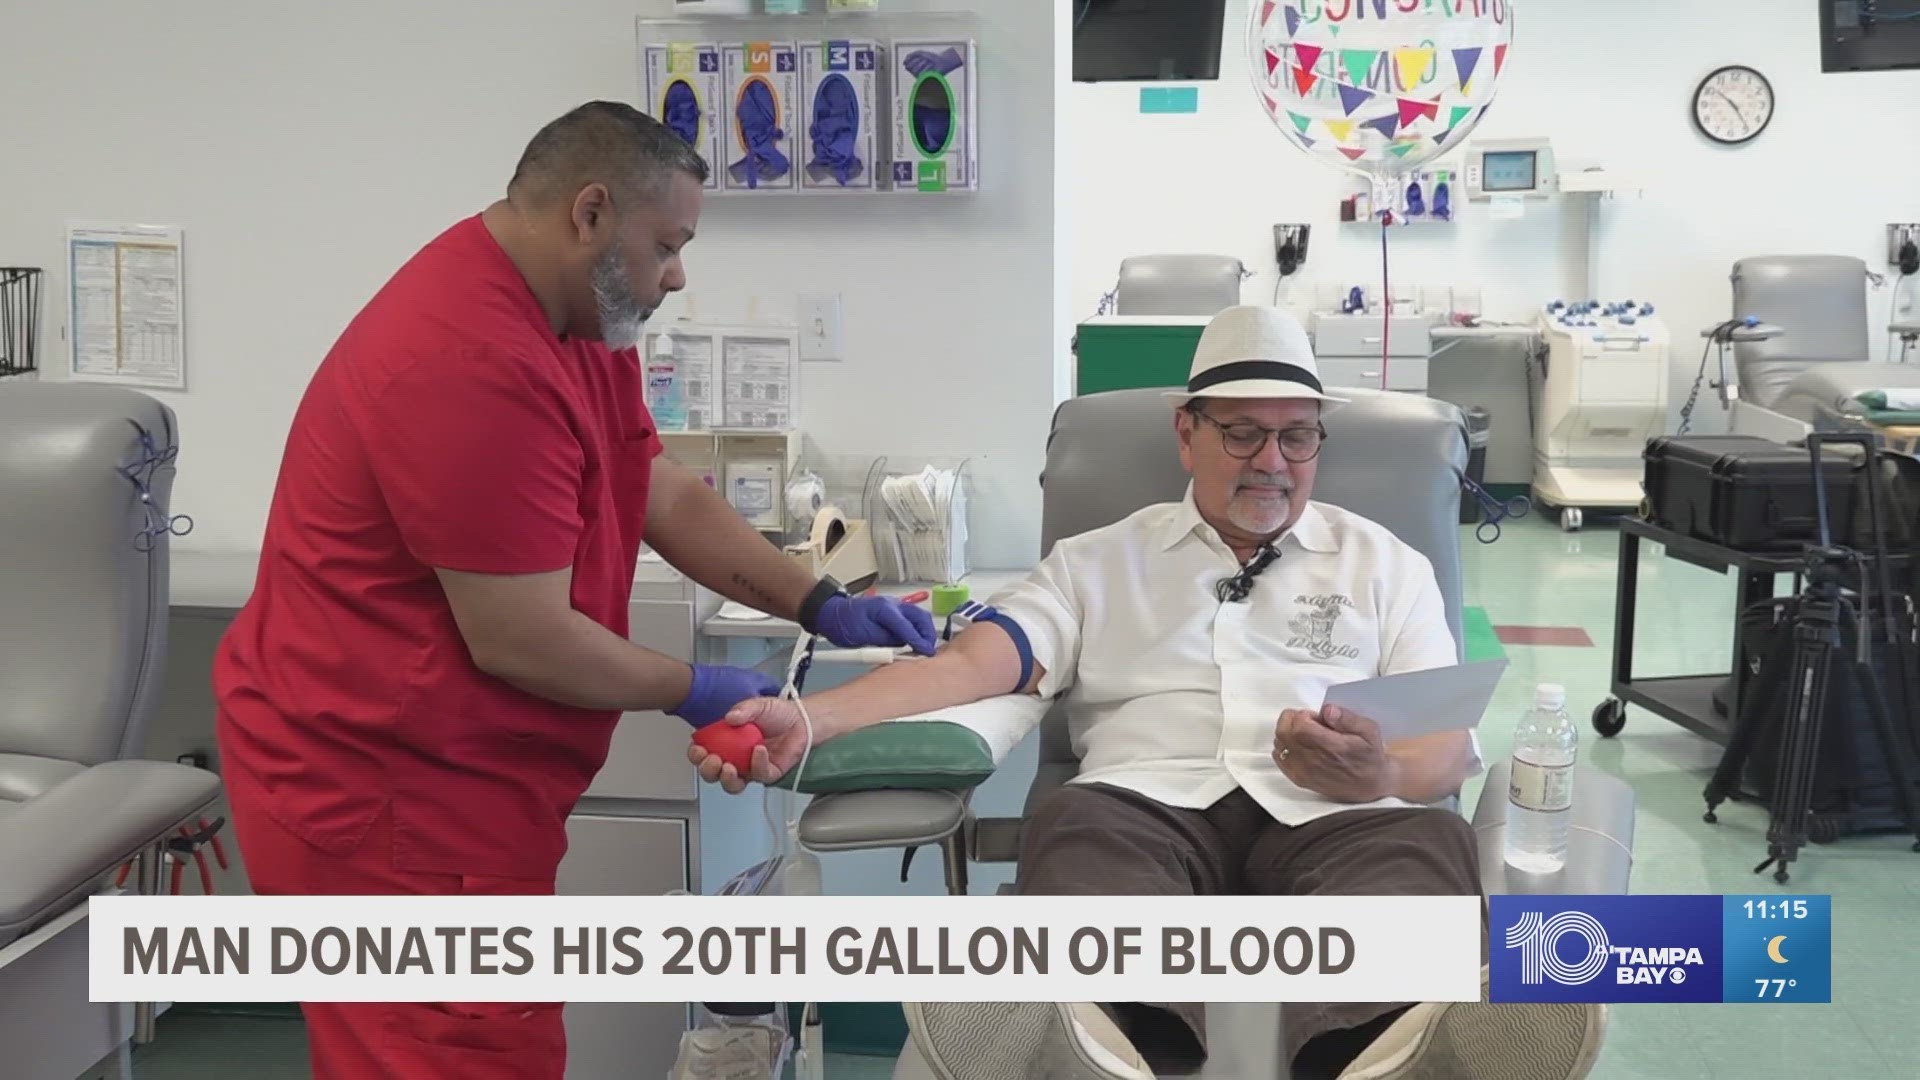 Over the last 47 years, Mario Nuñez has consistently donated blood. Now, he has reached a major milestone.